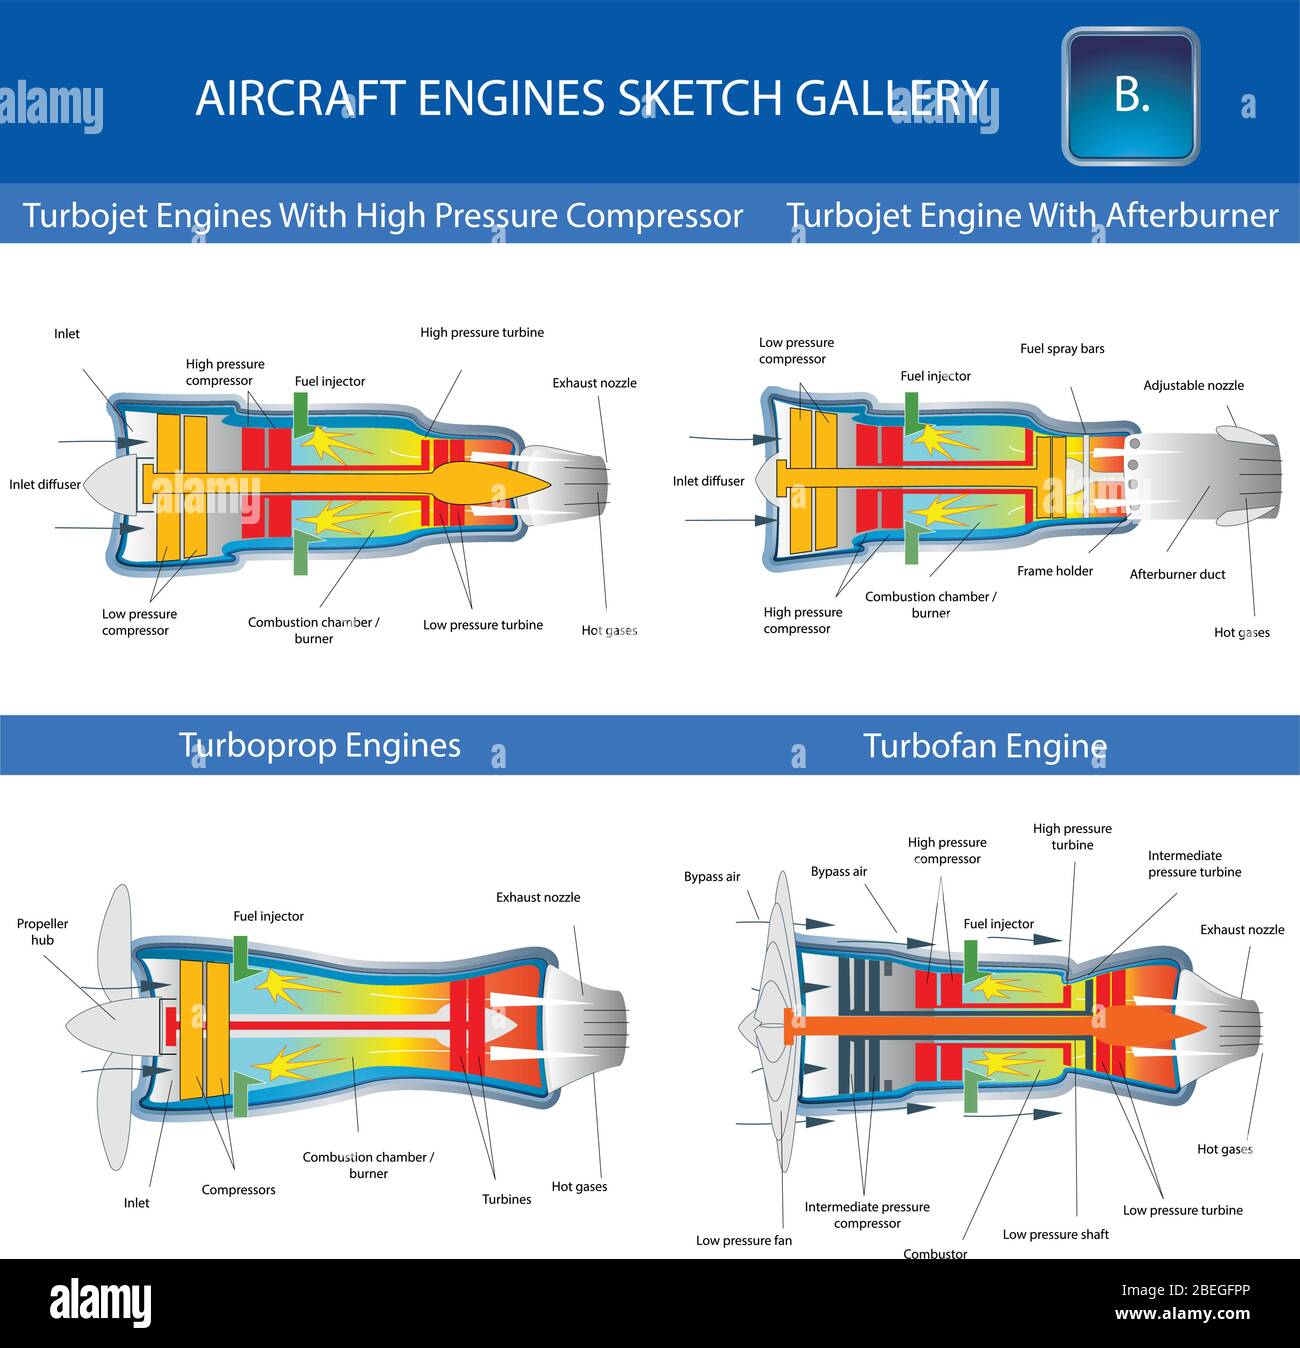 Turbojet, turboprop and turbofan aircraft engine, structural cross